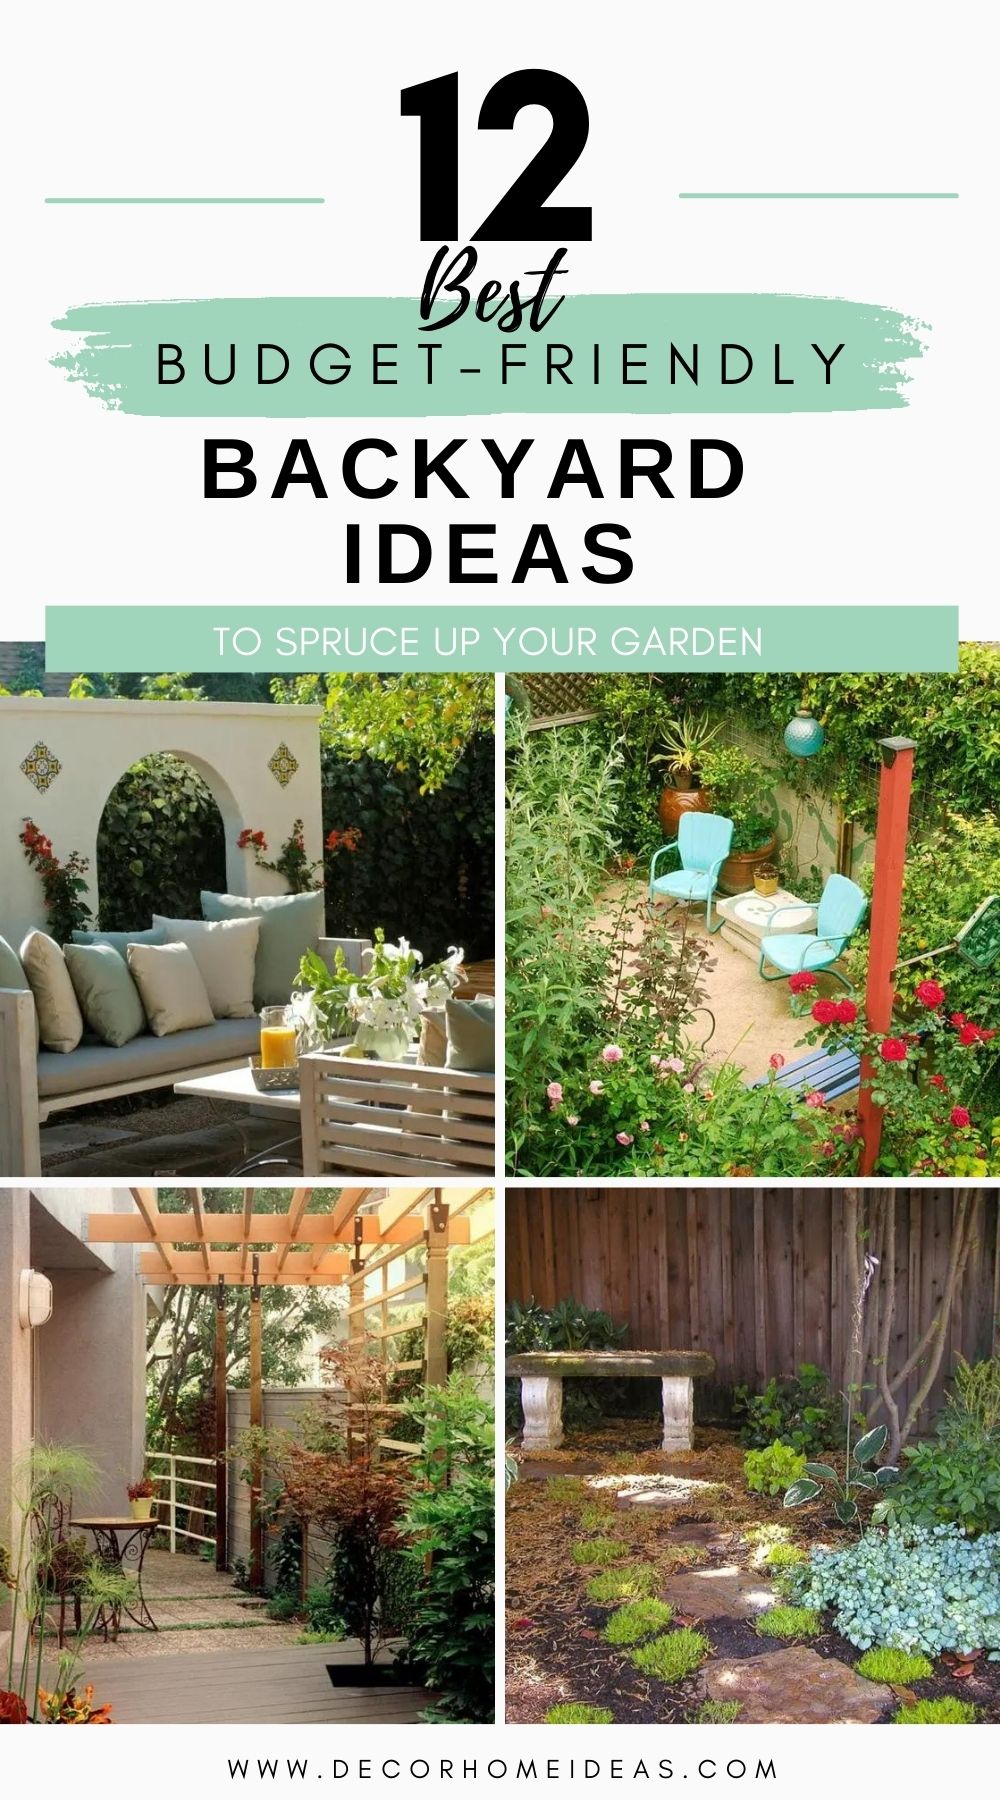 Get creative and save money with these 12 budget-friendly ideas for your backyard. From DIY projects to simple decorations, find the perfect way to spruce up your outdoor space.